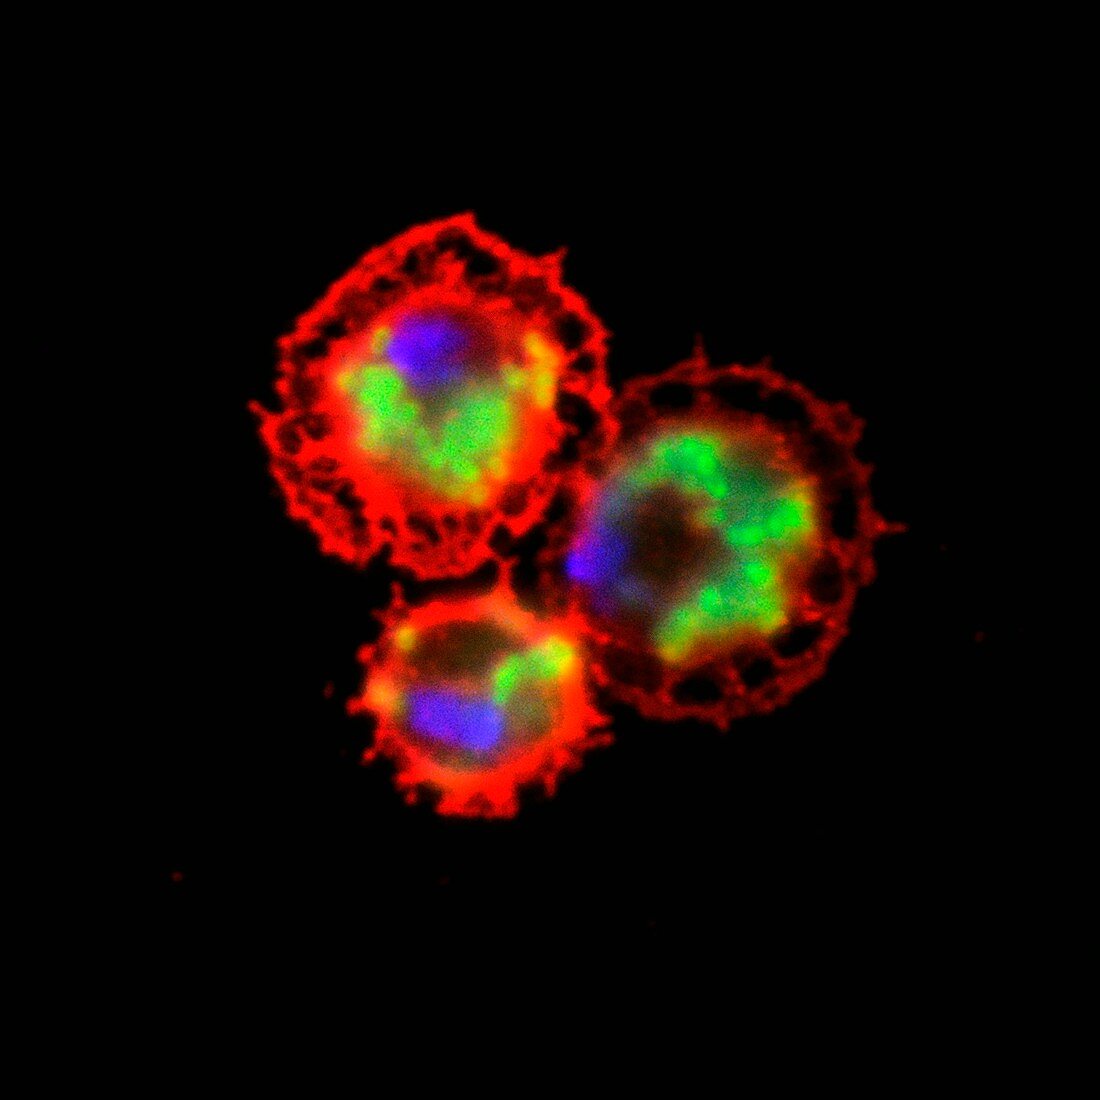 Fruit fly immune system cells, fluorescence micrograph